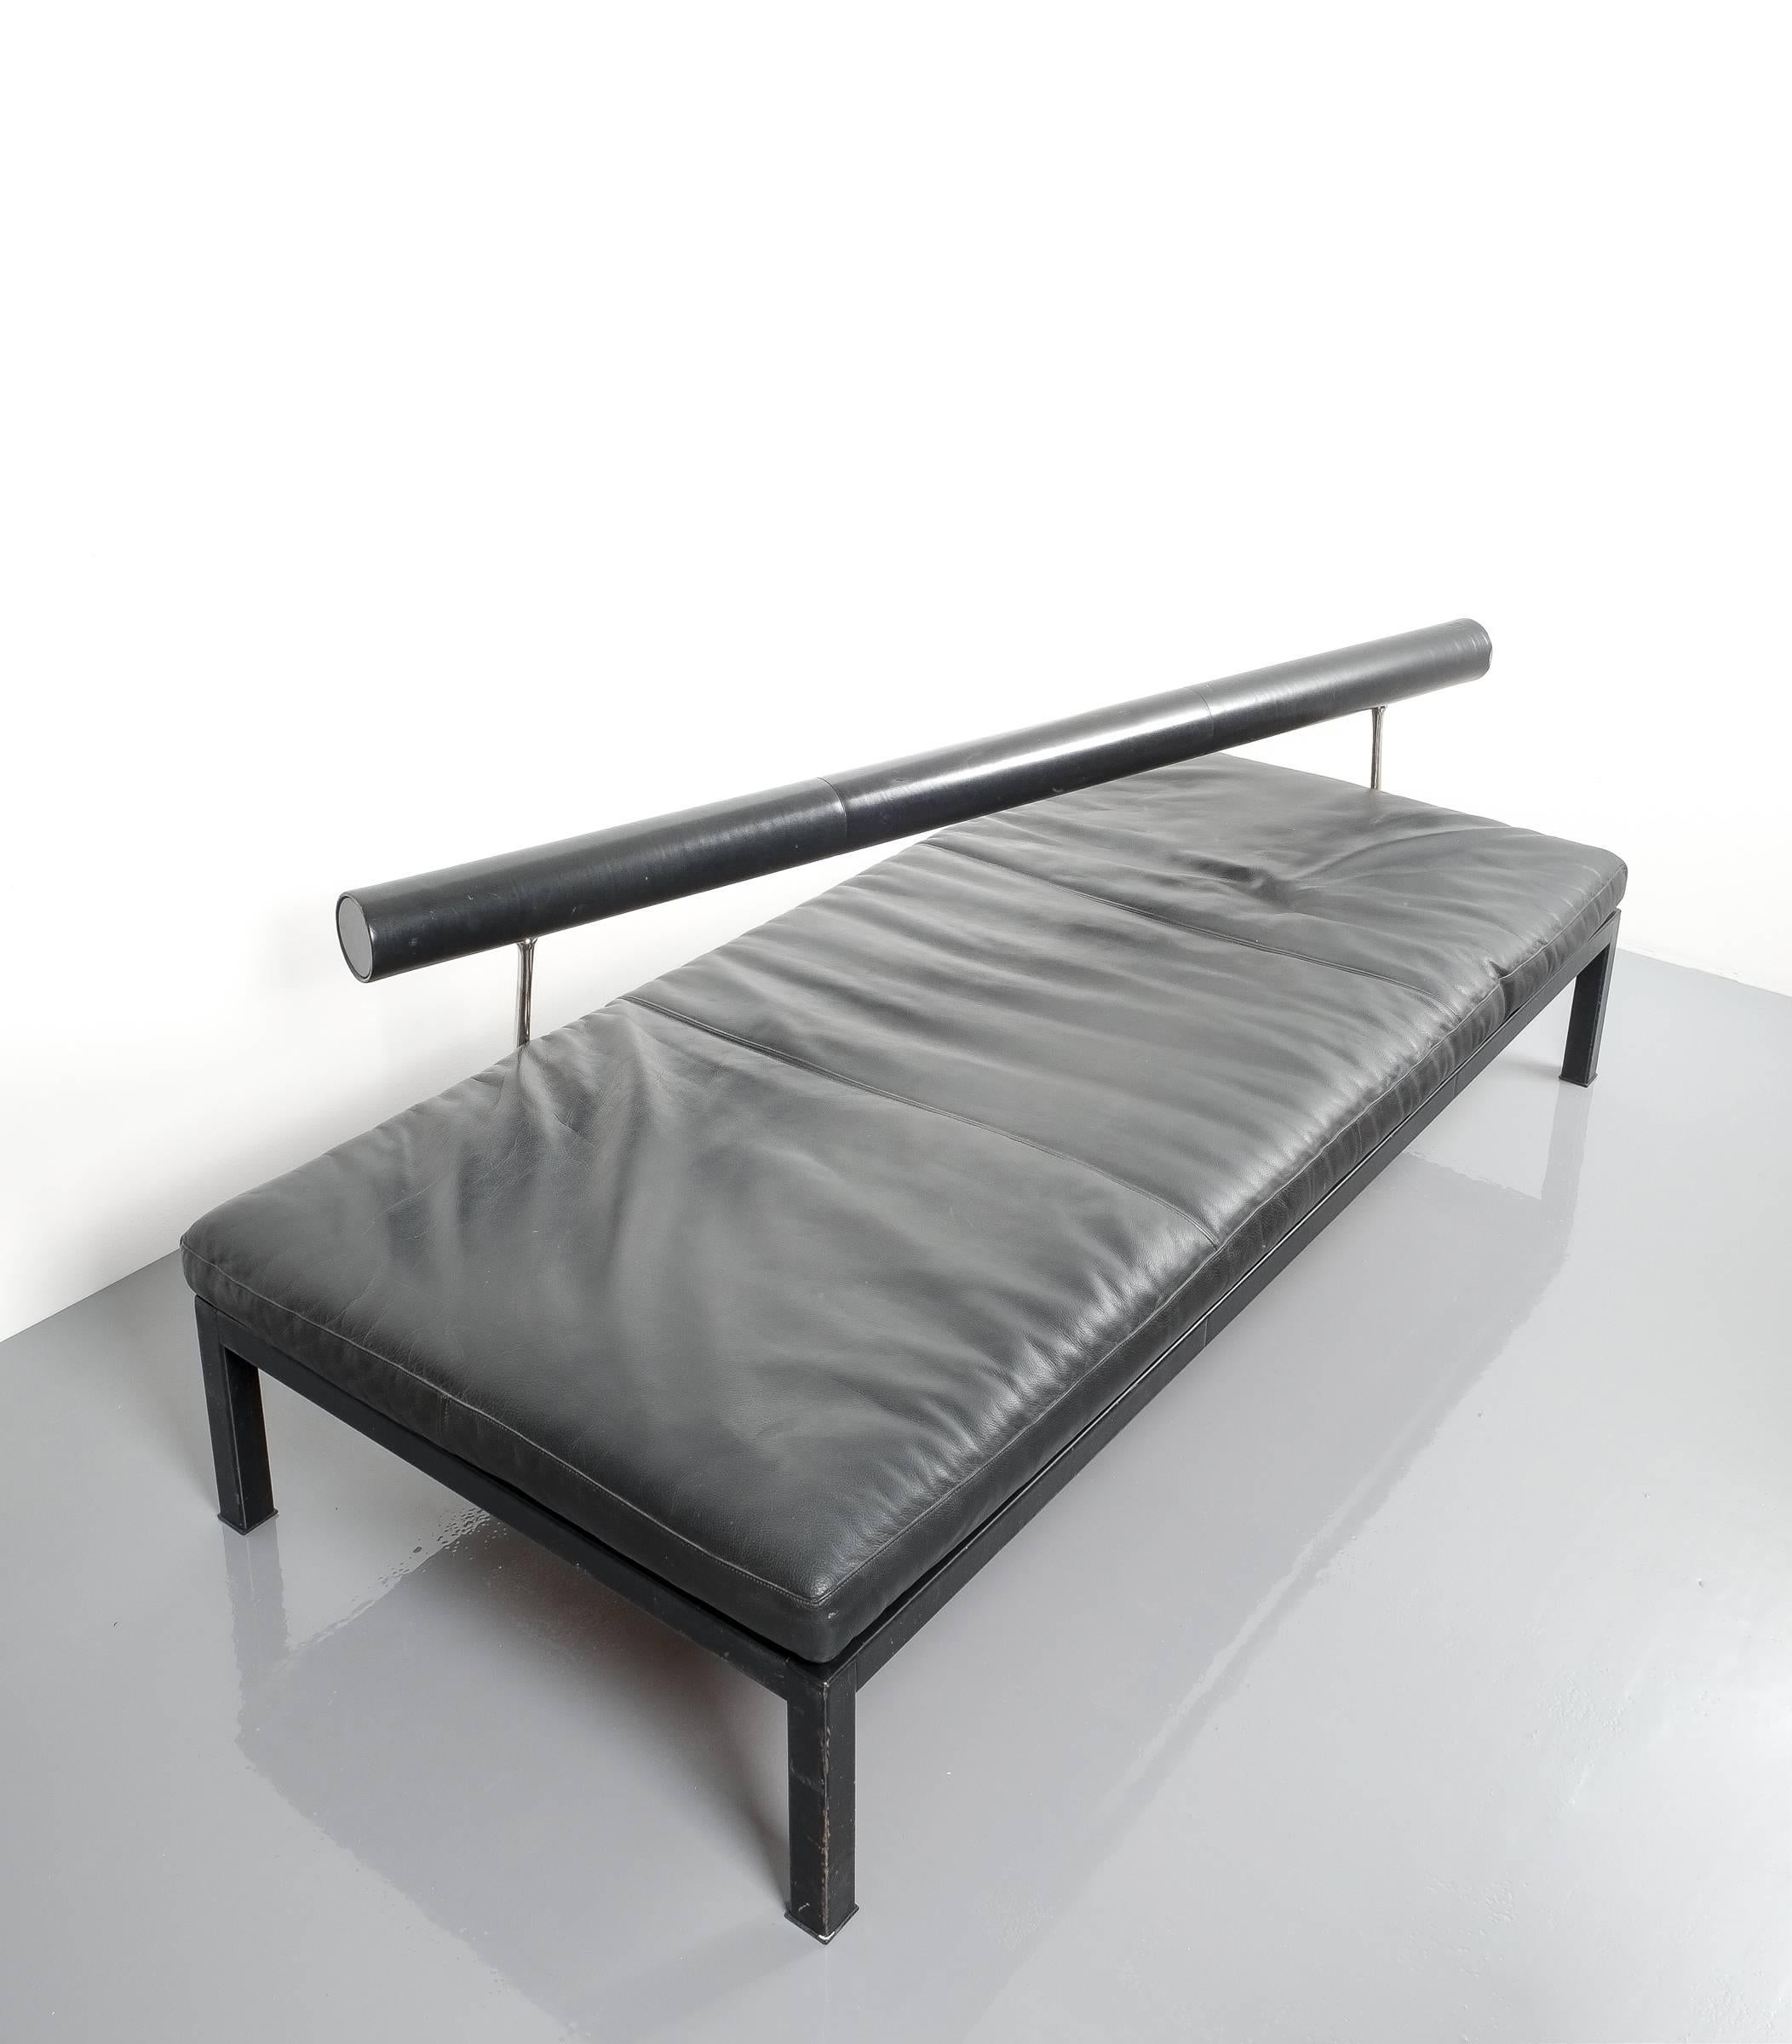 Antonio Citterio for B&B Italy elegant leather daybed sity, Italy, 1980s. Minimalistic daybed or chaise lounge designed by Antonio Citterio, 1986. The legs, frame and backrest are upholstered in black leather so is the black leather cushion.